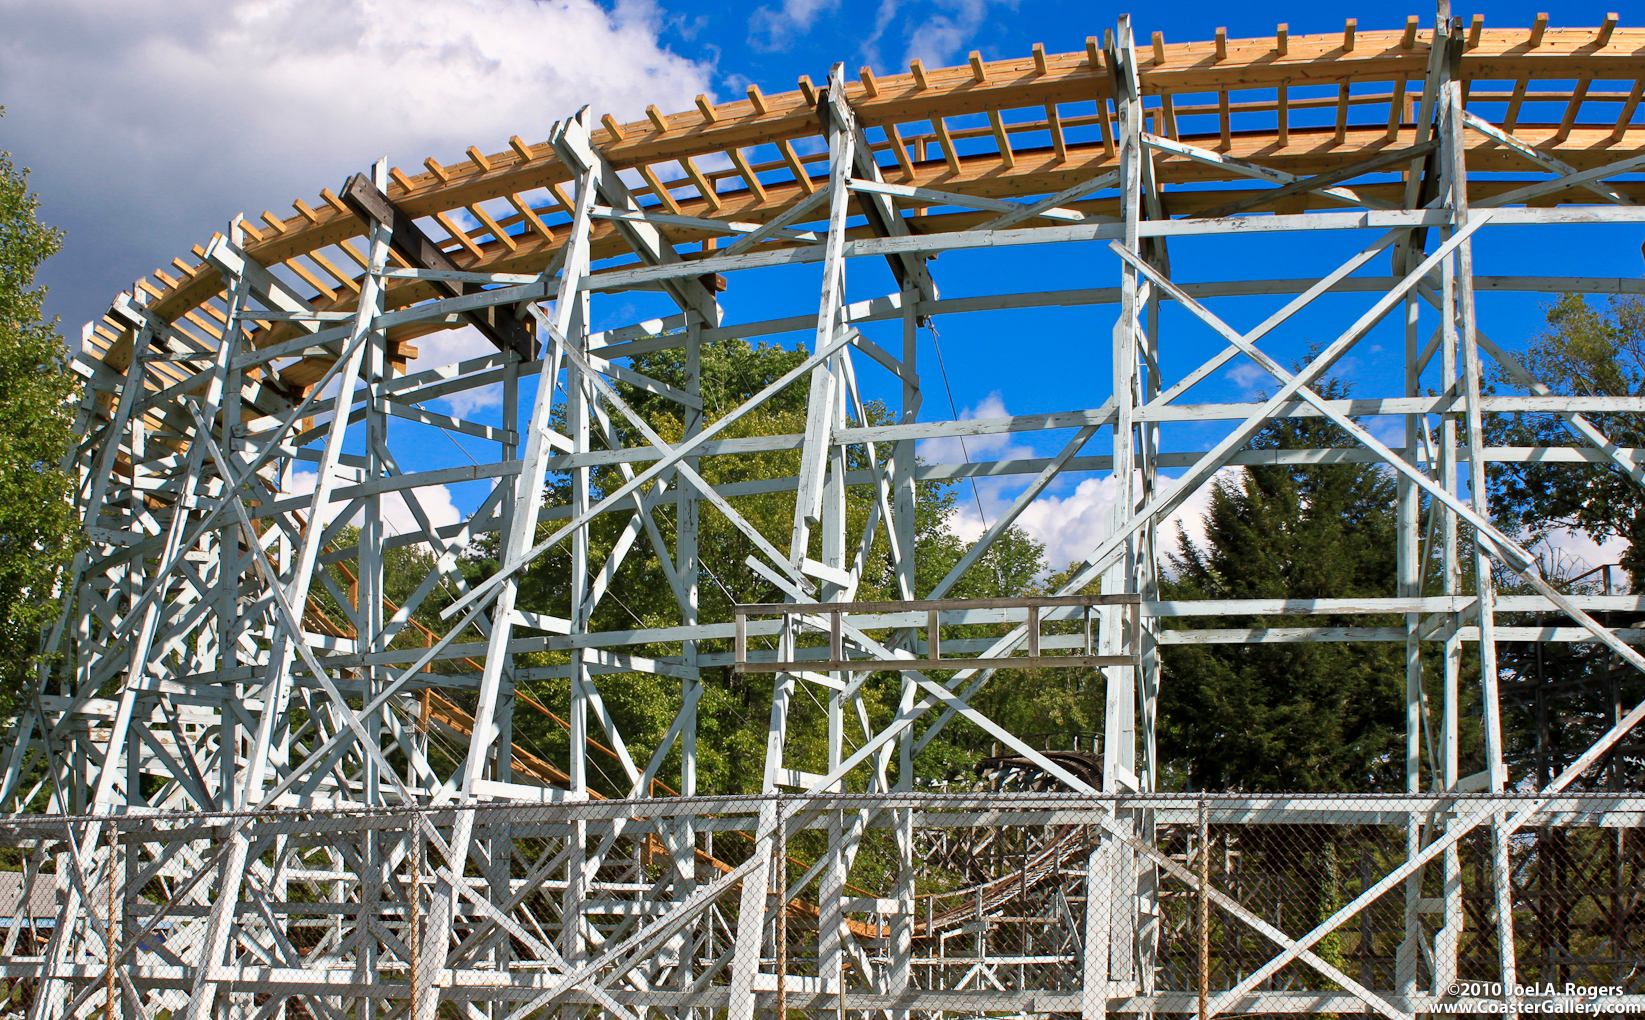 Conneaut Lake's Blue Streak roller coaster with recently replaced track